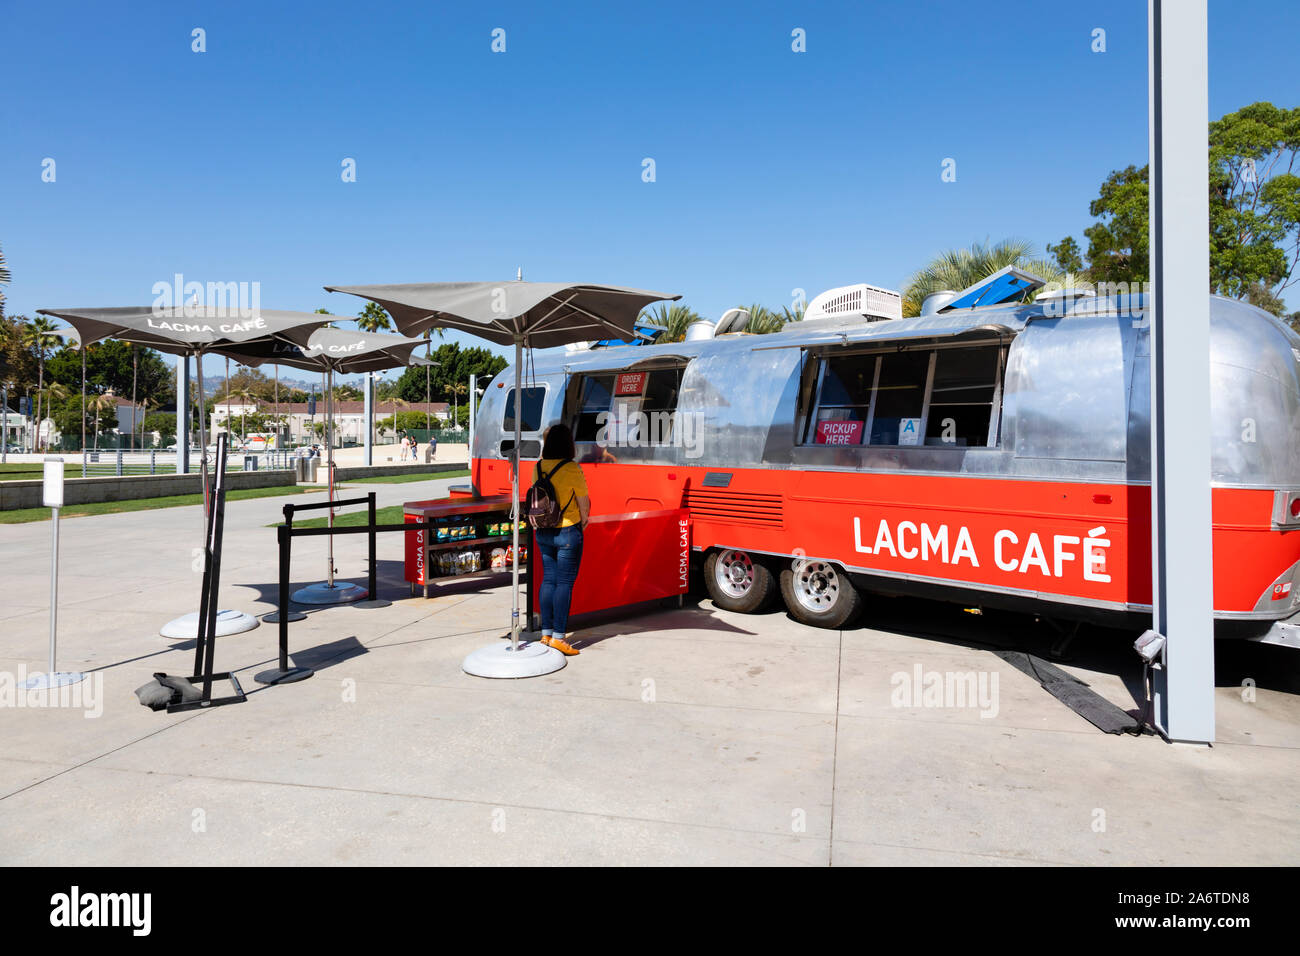 LACMA Cafe Airstream International burger trailer at the Los Angeles county Museum of Art, Los Angeles, California, United States of America Stock Photo